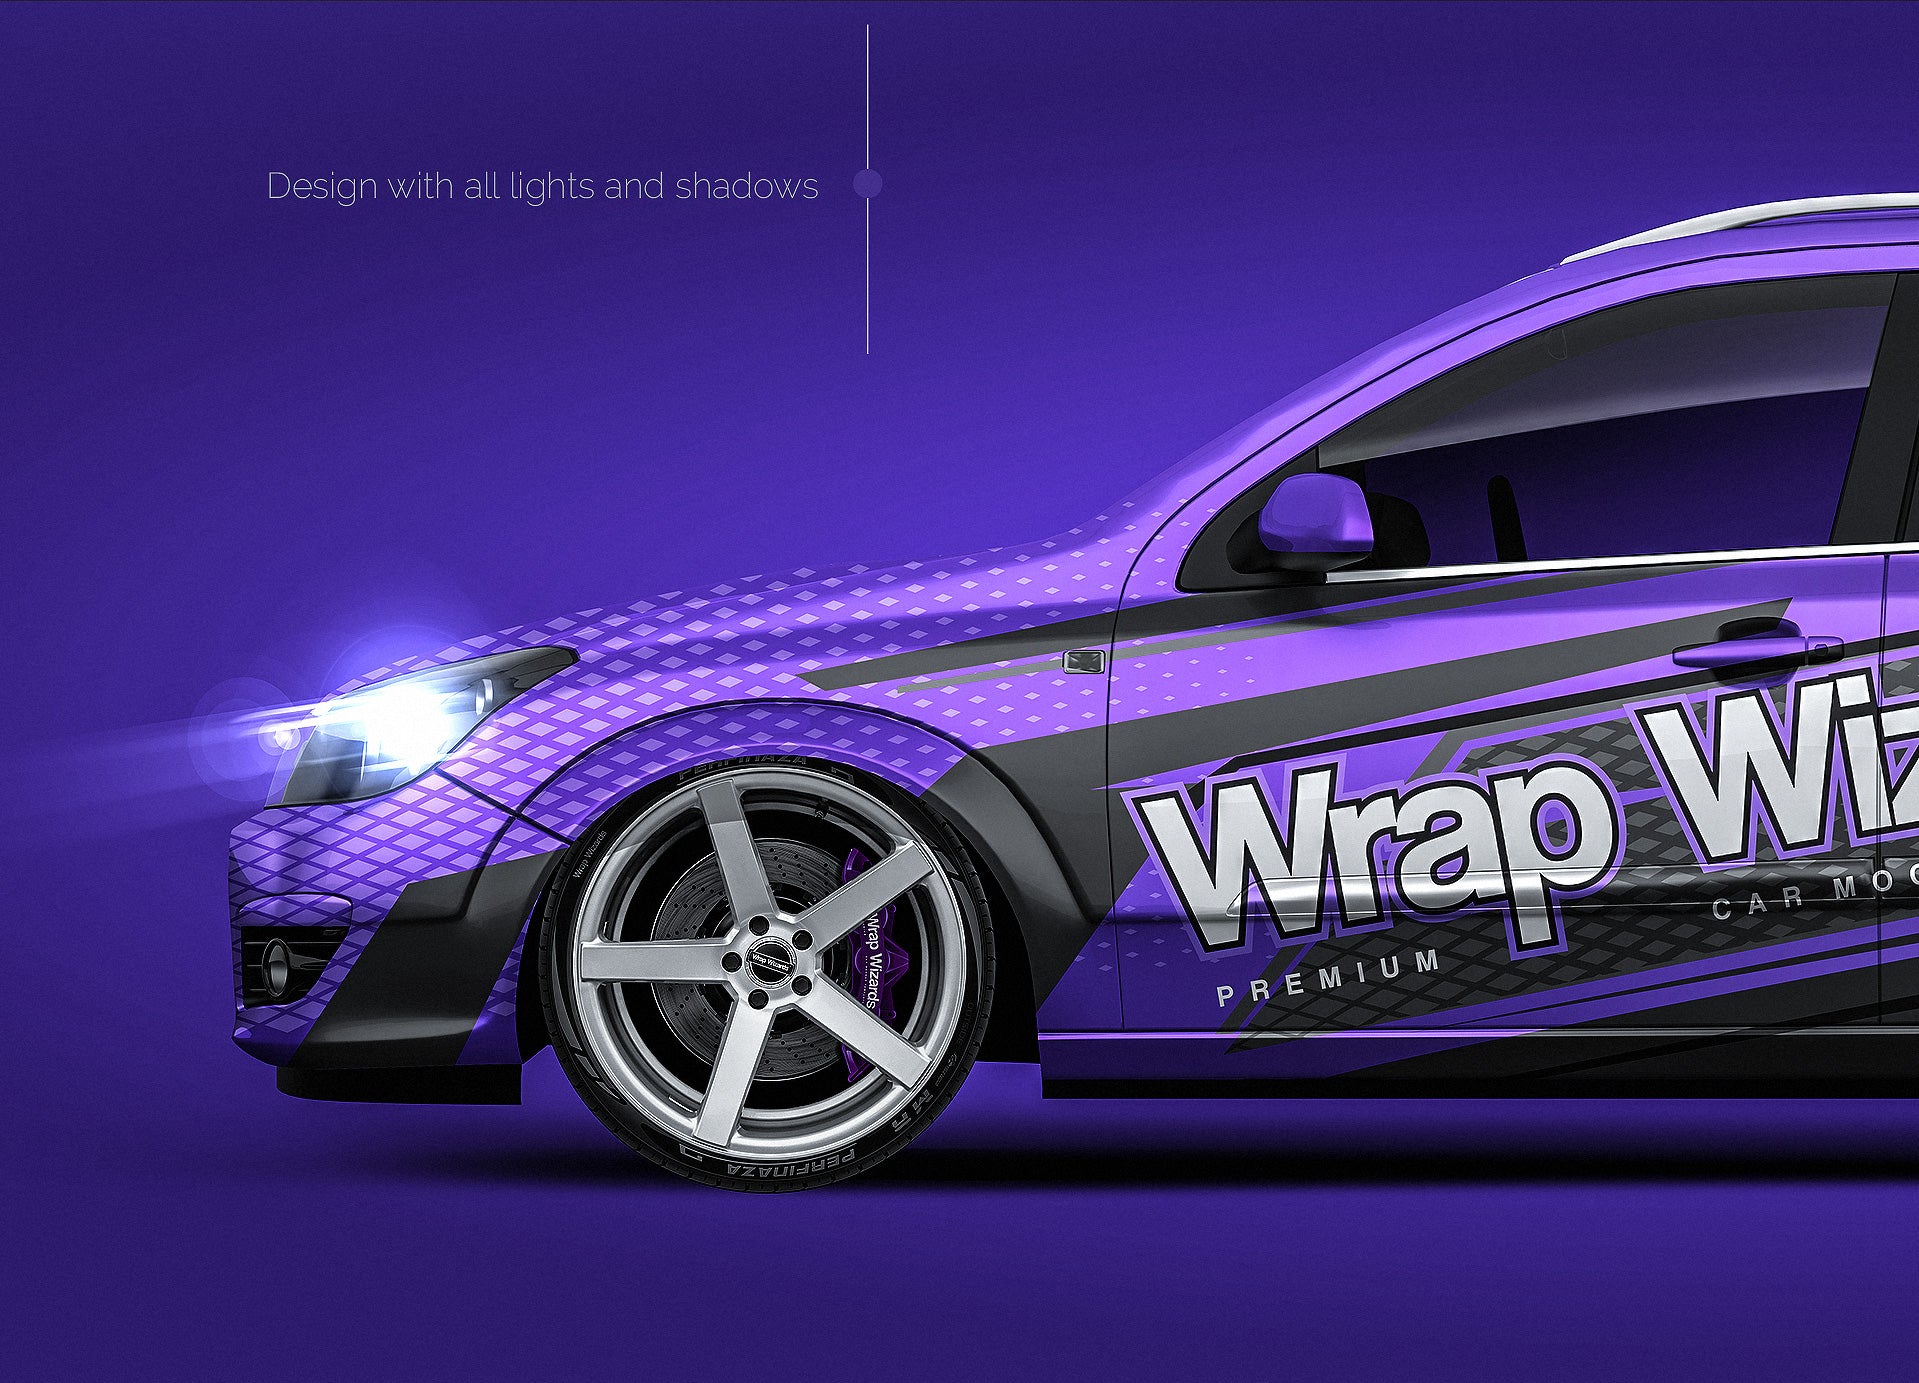 Opel Astra H Touring glossy finish - all sides Car Mockup Template.psd